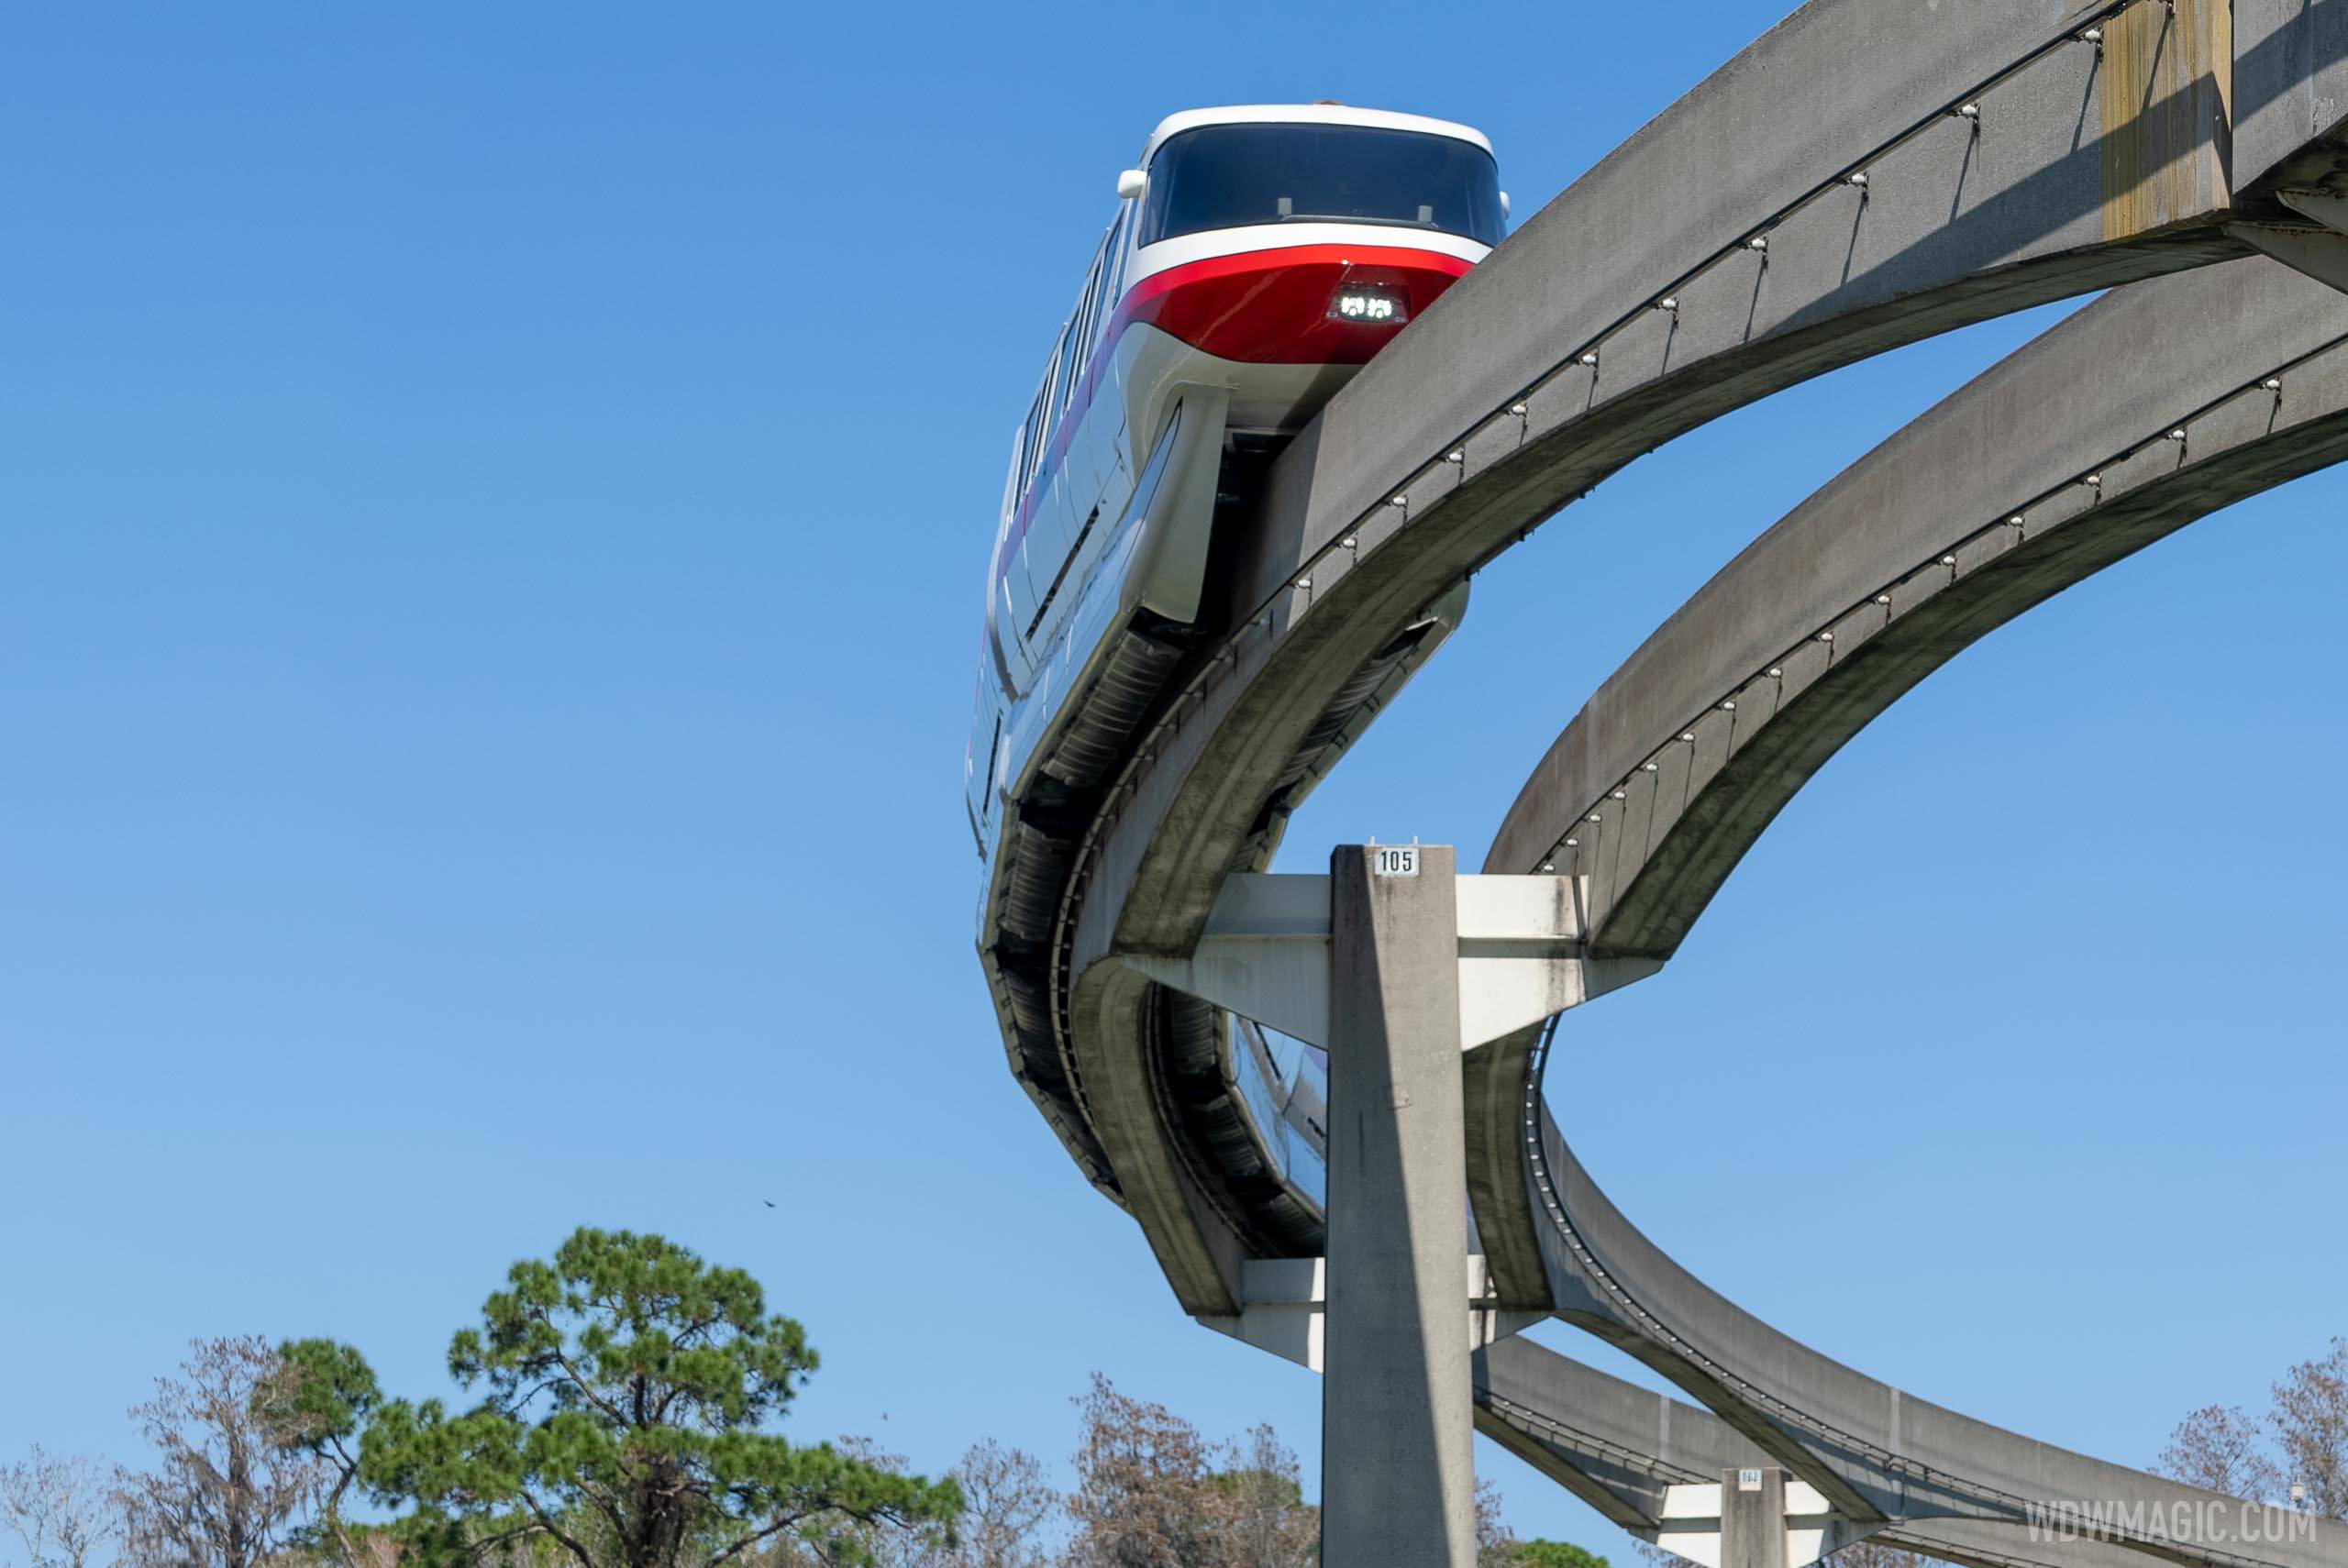 Repainted Monorail Red - February 2021